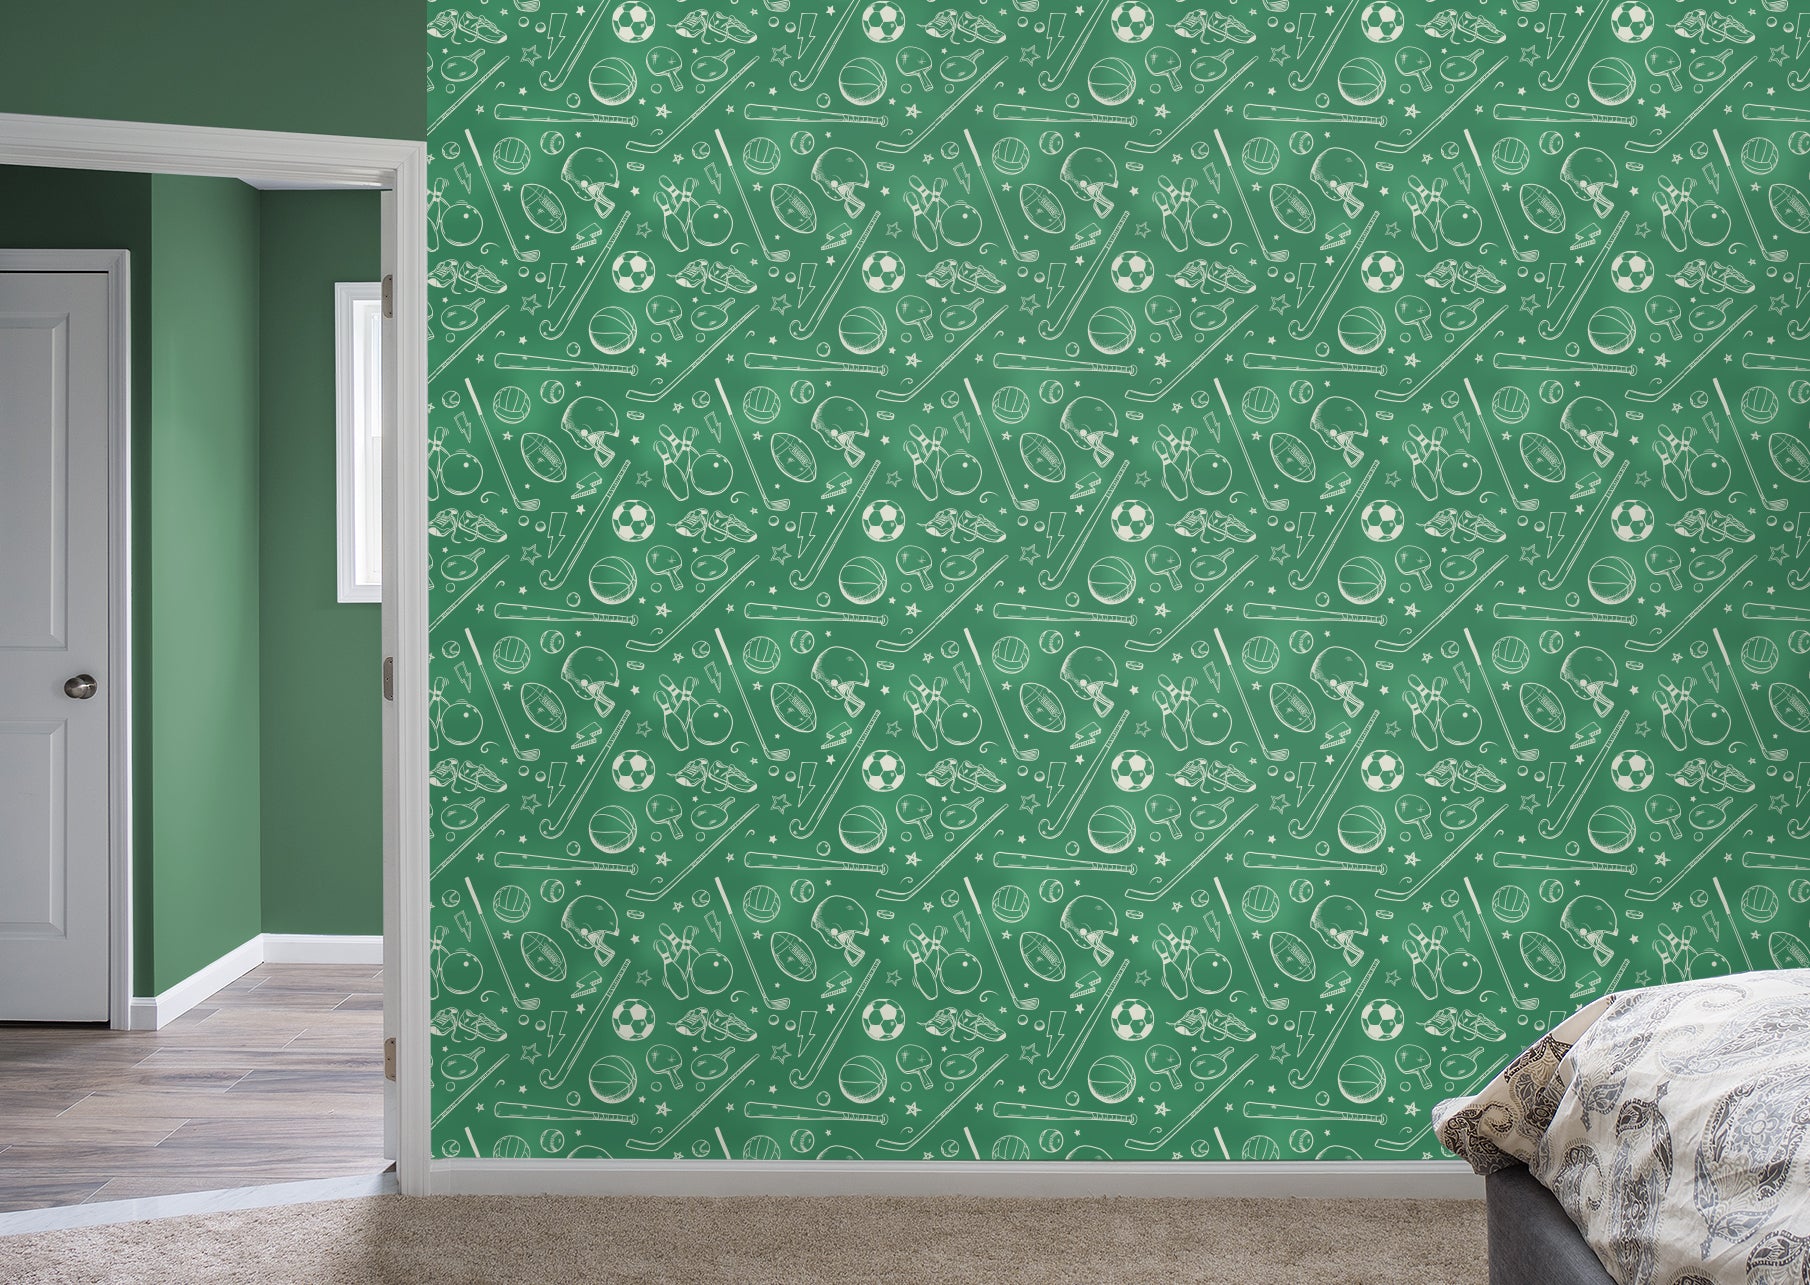 Master of Sports for Sports & Activities - Green for Sports & Activities - Peel & Stick Wallpaper 24" x 48" (8 sf) by Fathead